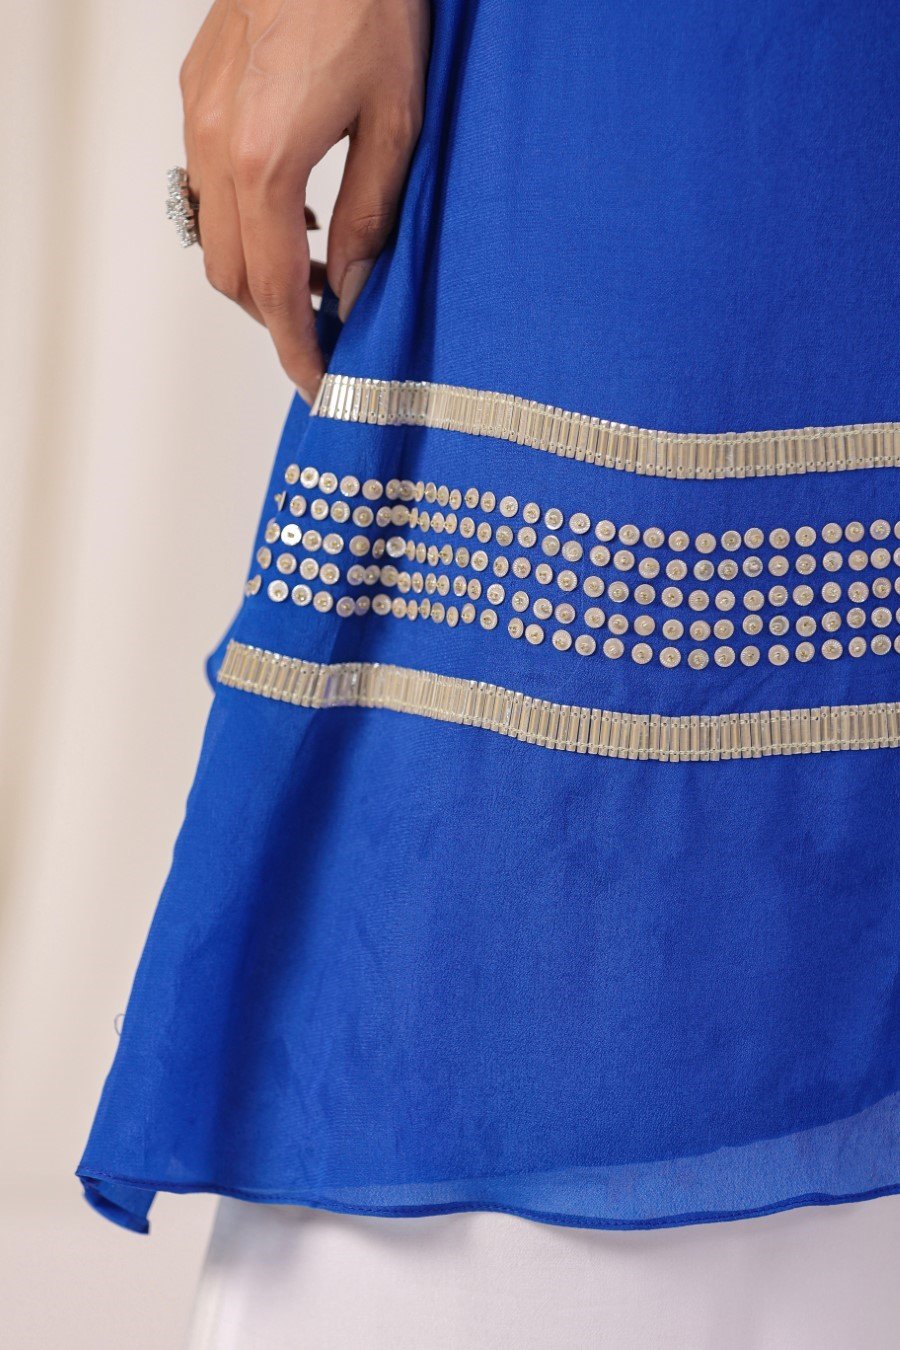 Royal Blue Embellsihed Tunic with Palazzo